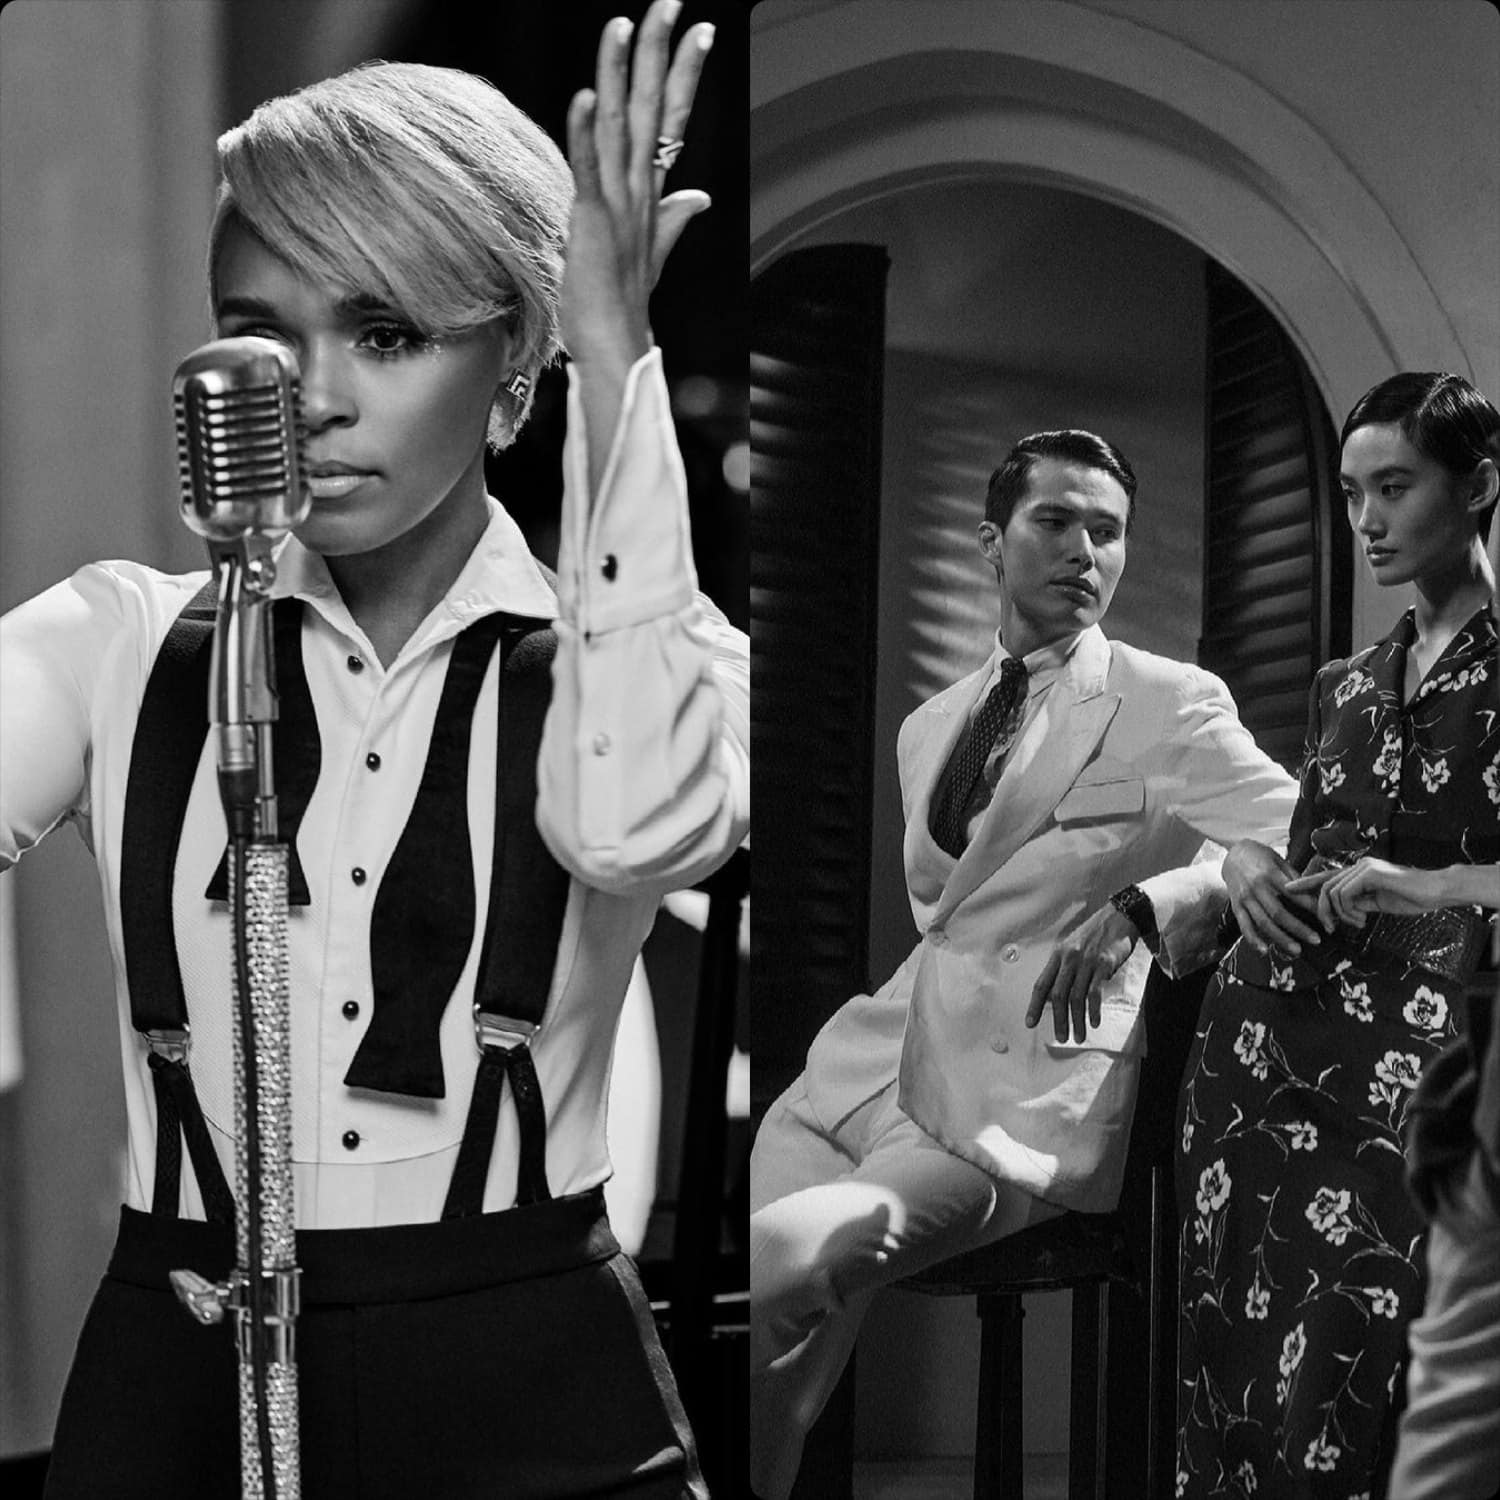 Ralph Lauren Spring Summer 2021 New York. - All or Nothing at All - Janelle Monáe LIVE concert. RUNWAY MAGAZINE ® Collections. RUNWAY NOW / RUNWAY NEW